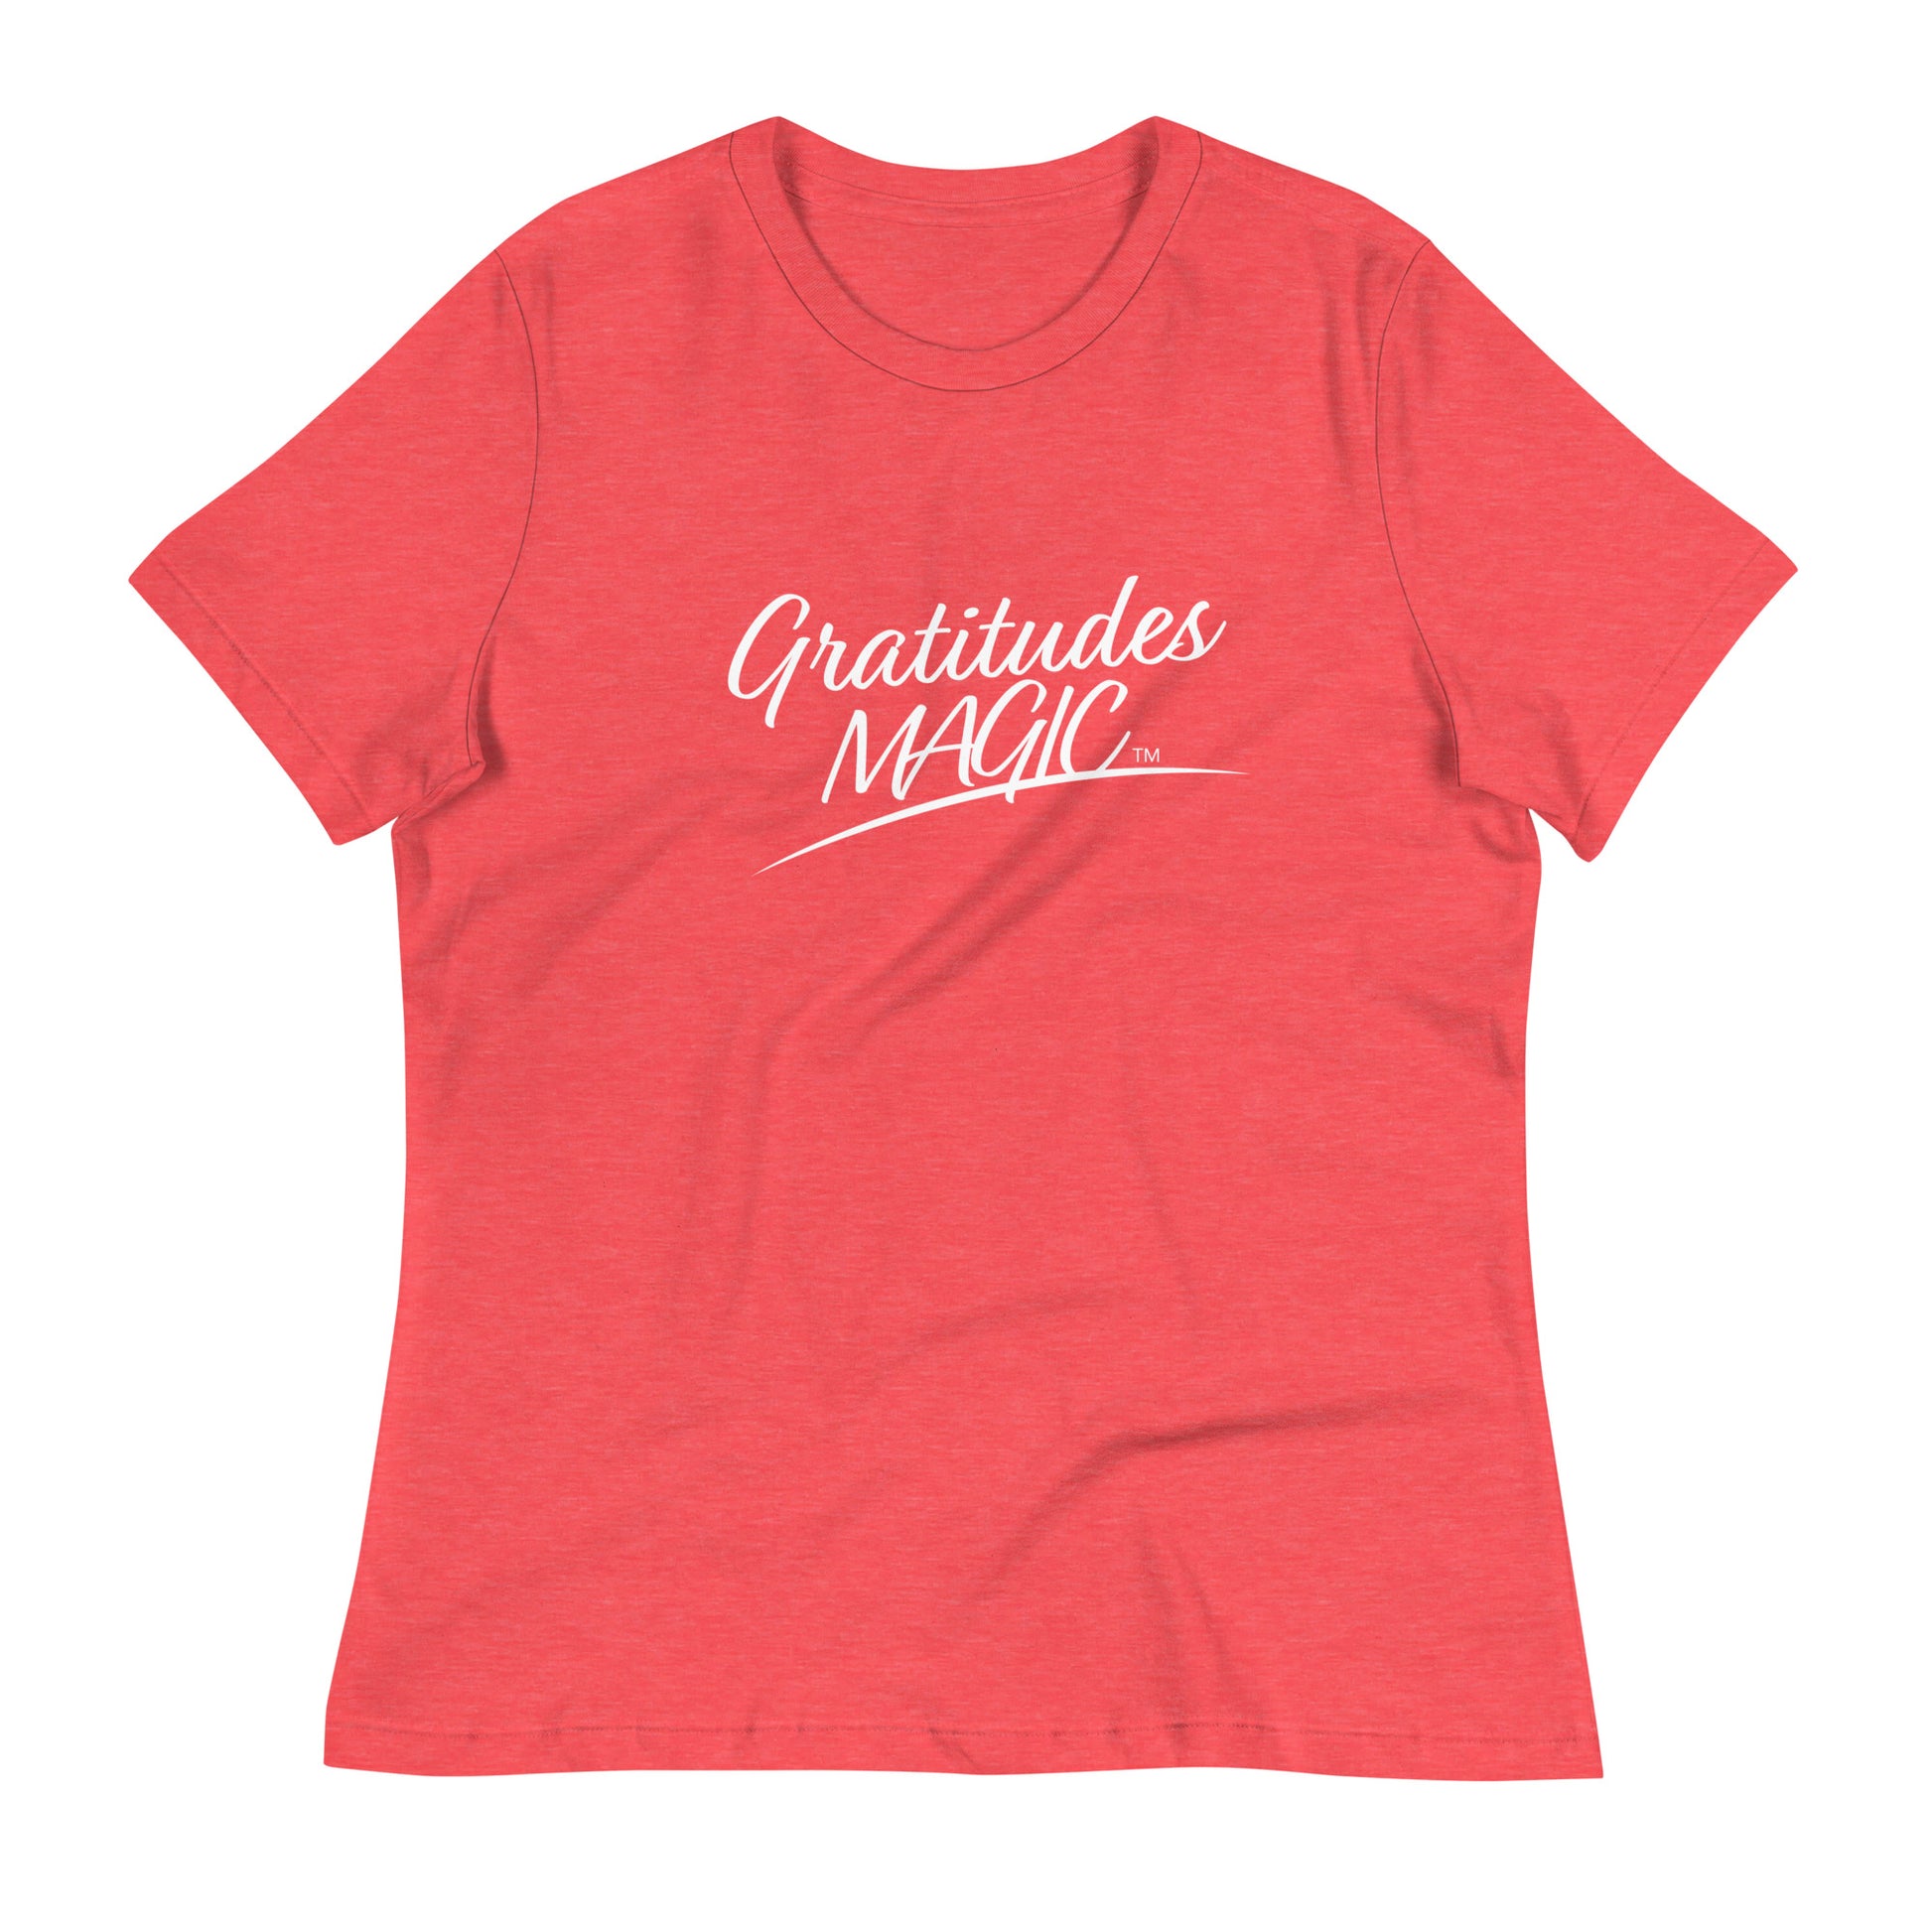 Affordable women's tees- Heather red